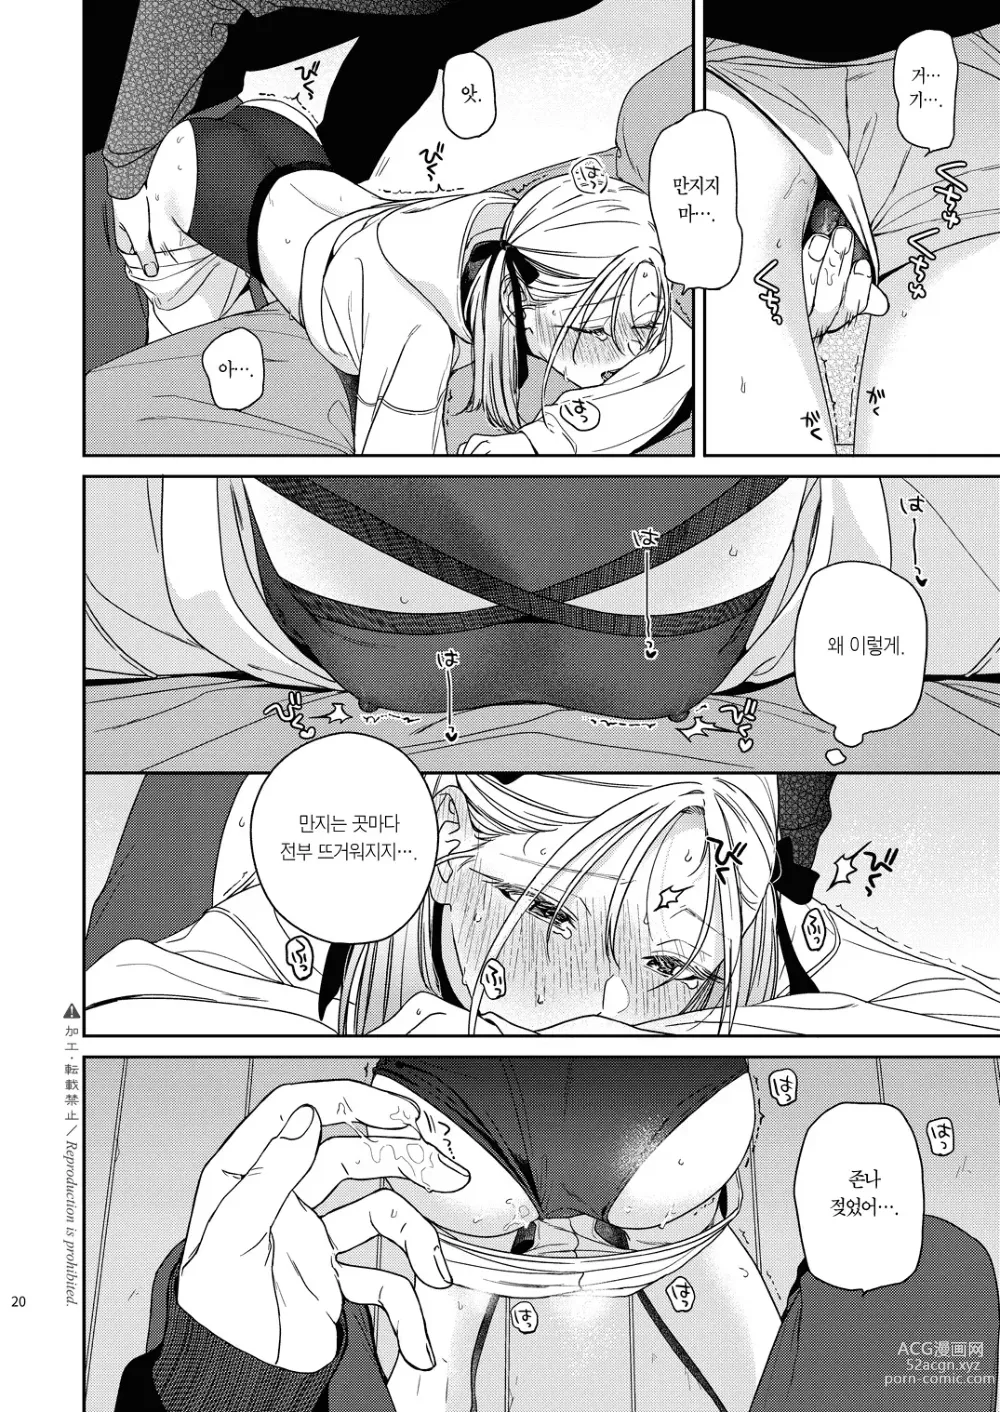 Page 21 of doujinshi 카타미와 월맹